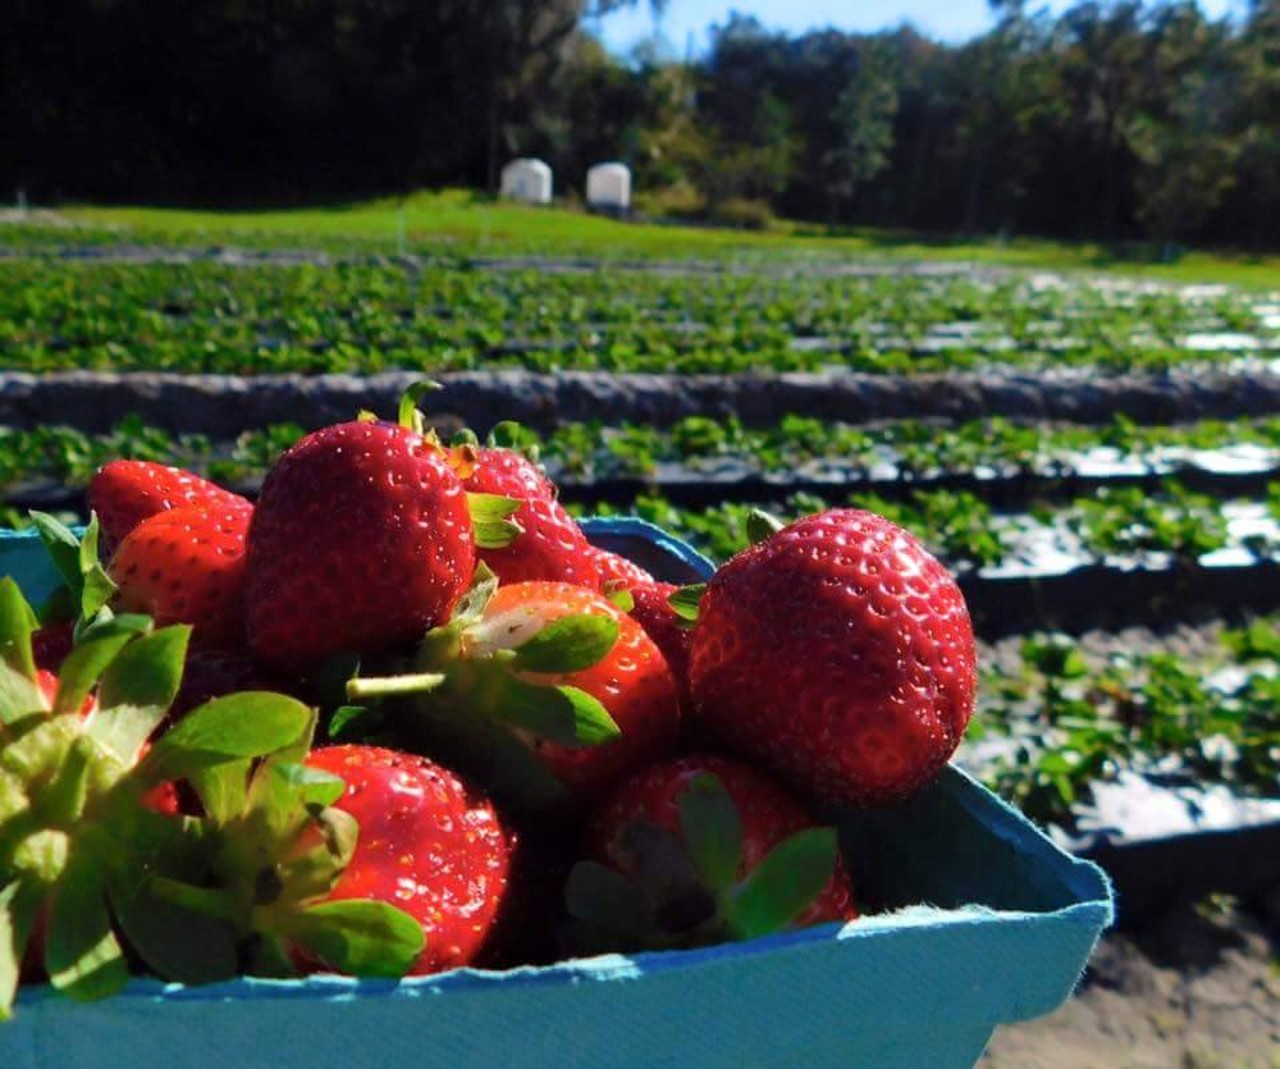 Go strawberry picking at Pappy&#146;s Patch U-Pick
501 Florida Ave, Oviedo, 407-366-8512 
Strawberry season ranges from Dec. to April. Coincidentally, those are the perfect months to go out and pick anything. Strawberries are only $2.75 a pound, so go crazy.
Photo via Pappy's Patch/Facebook